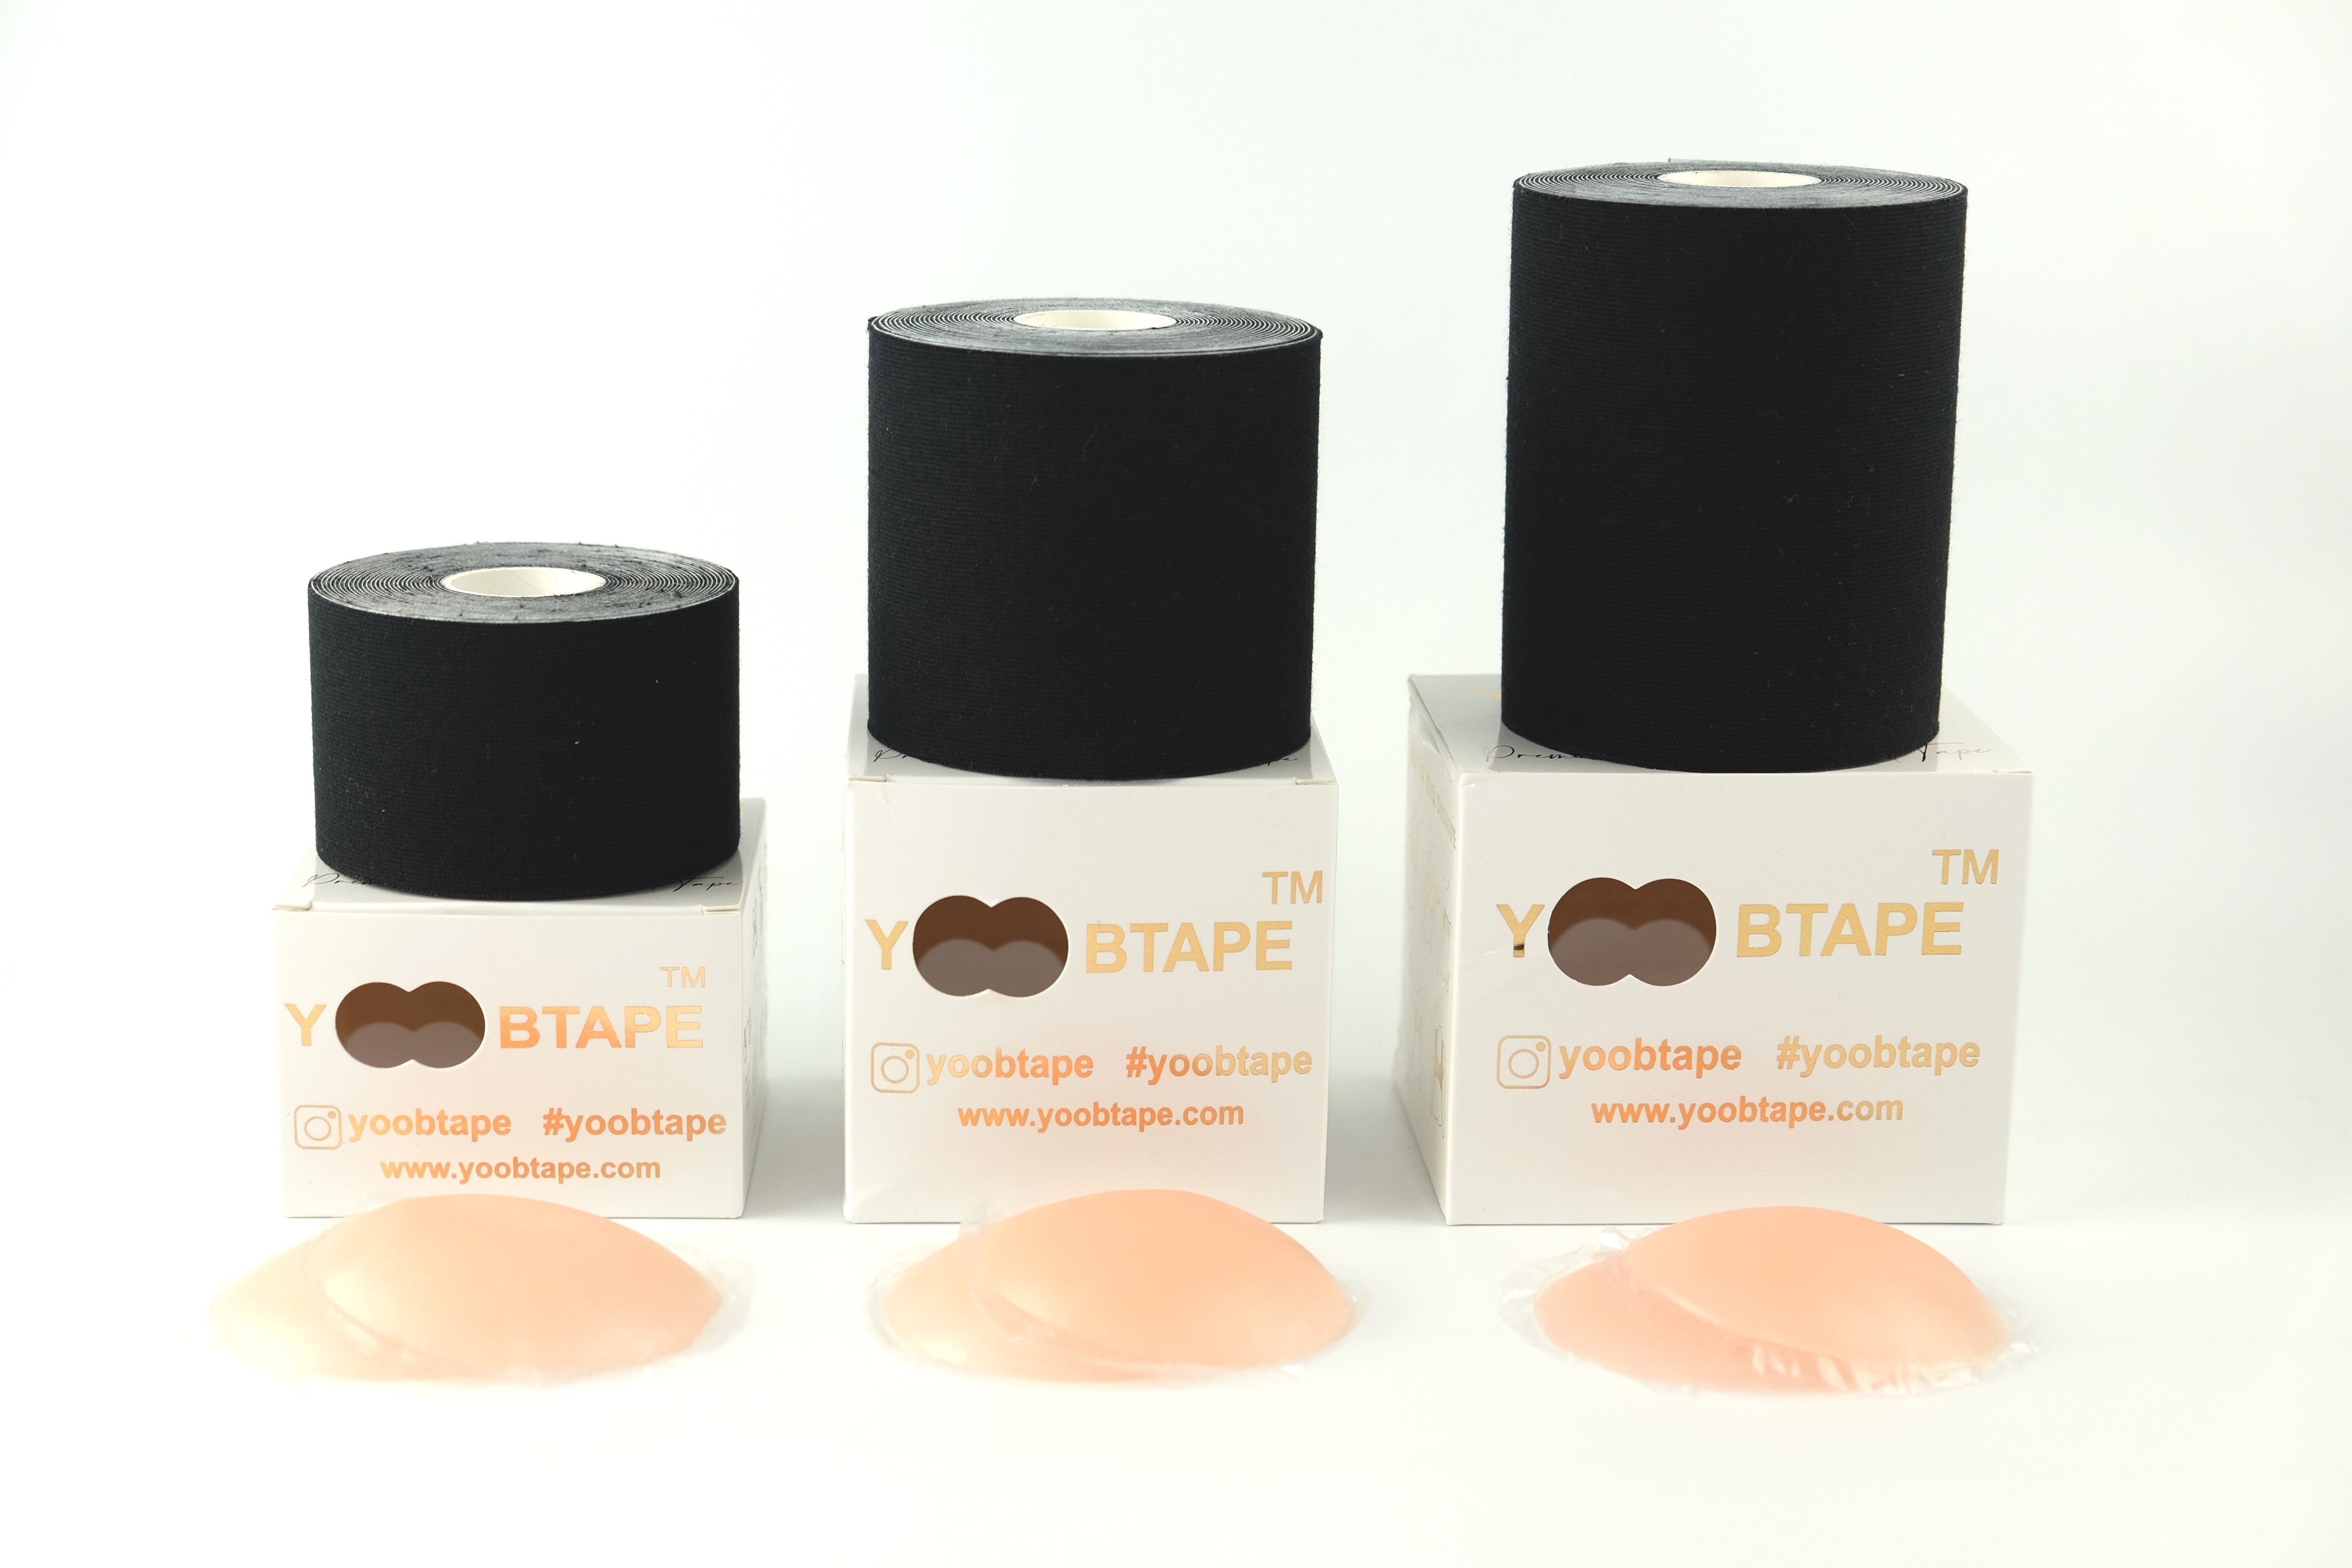 YOOBTAPE Premium Double Sided Bust Tape - Midnight